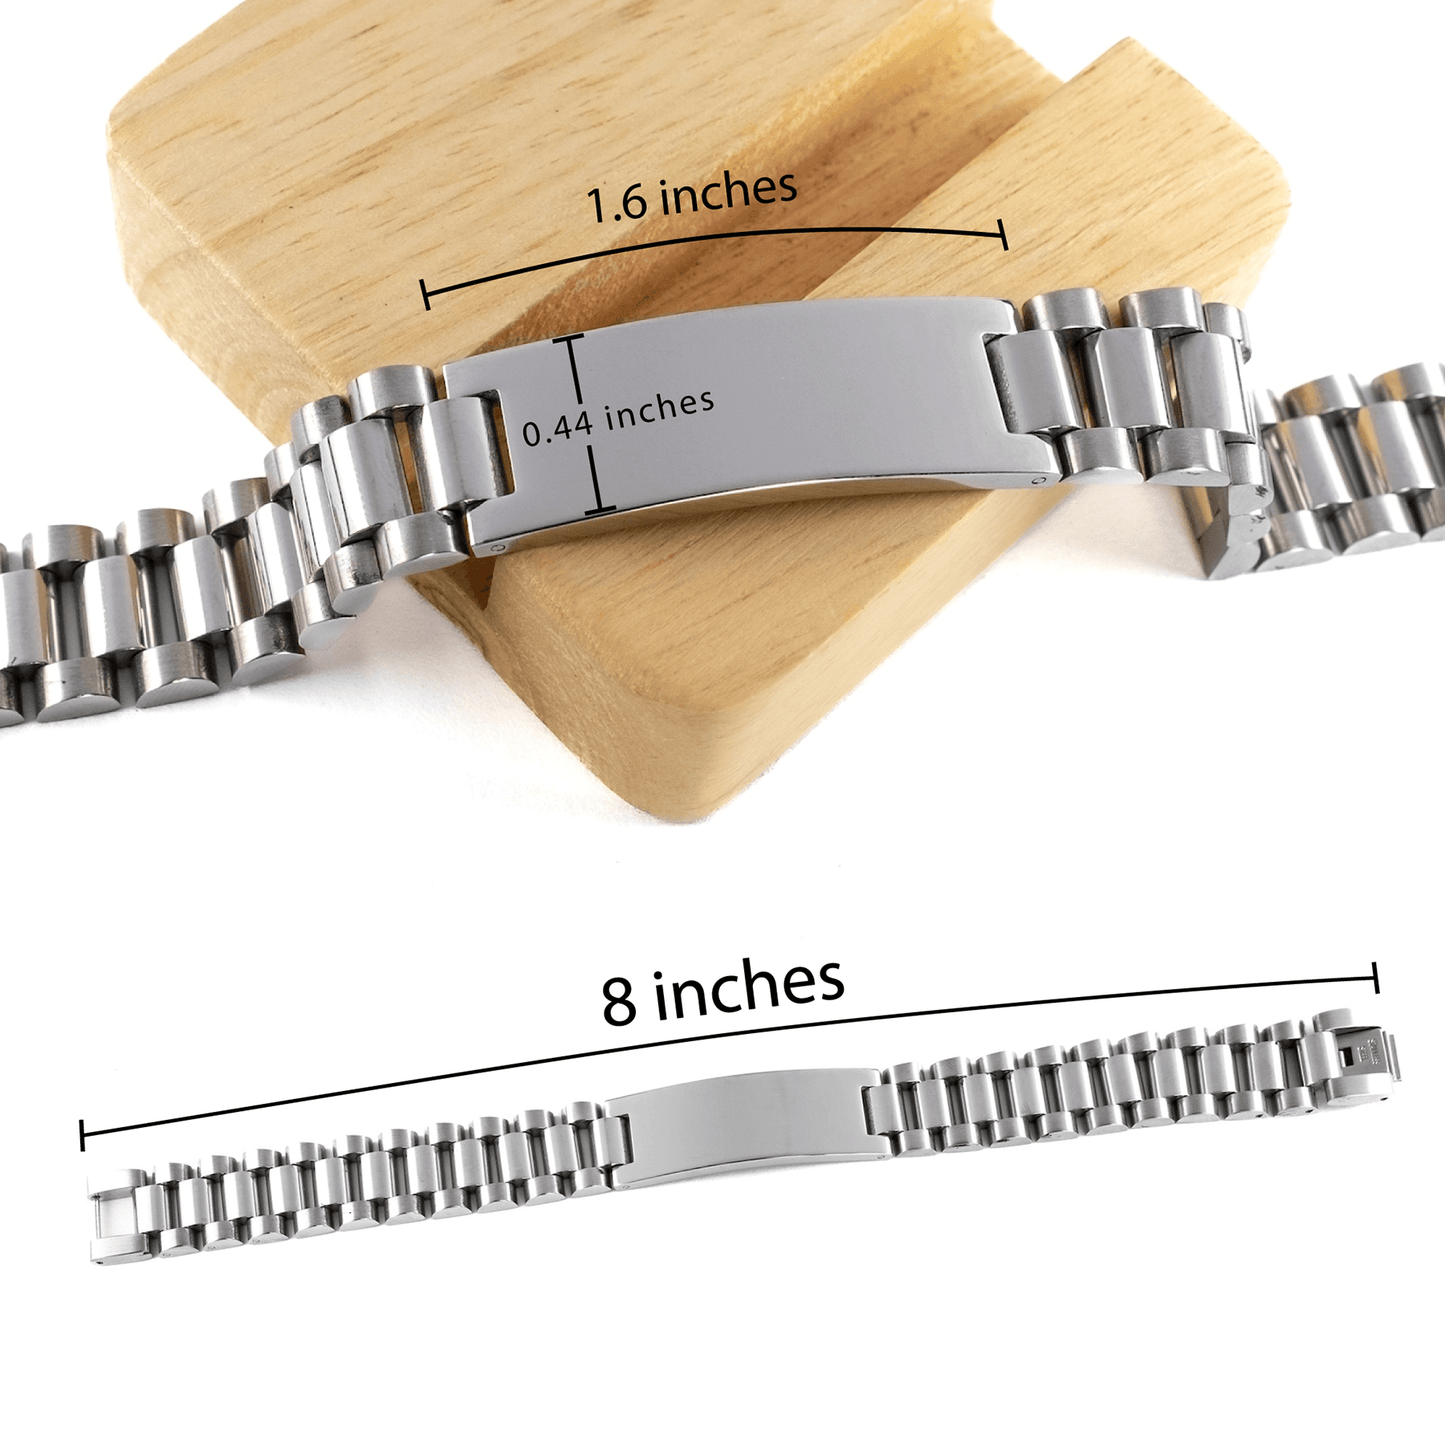 Remarkable Medical Assistant Gifts, Your dedication and hard work, Inspirational Birthday Christmas Unique Ladder Stainless Steel Bracelet For Medical Assistant, Coworkers, Men, Women, Friends - Mallard Moon Gift Shop